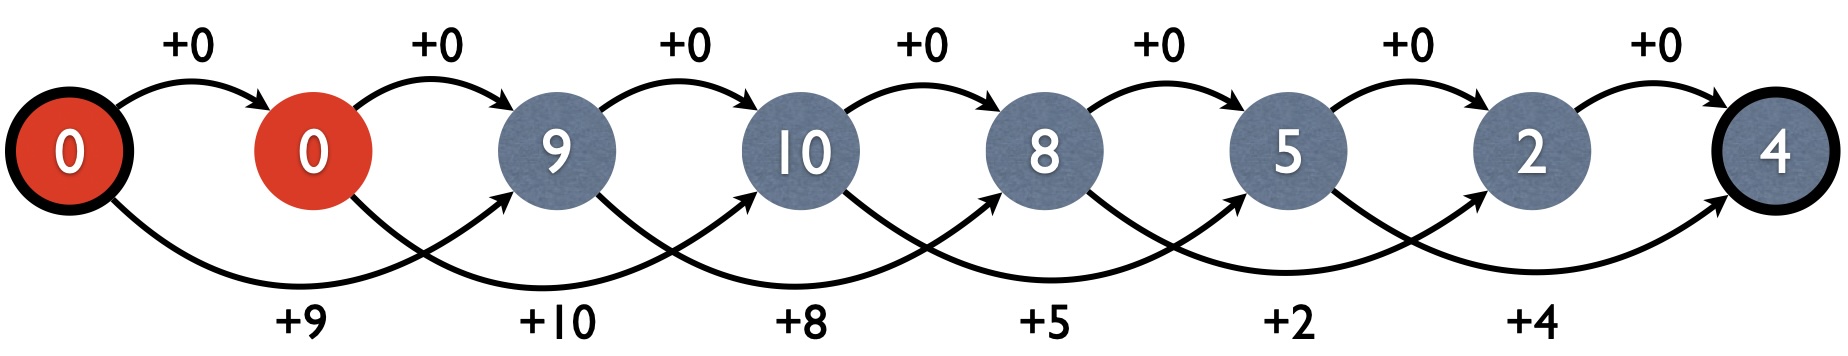 The DP graph for MIS, which is different from the input graph.